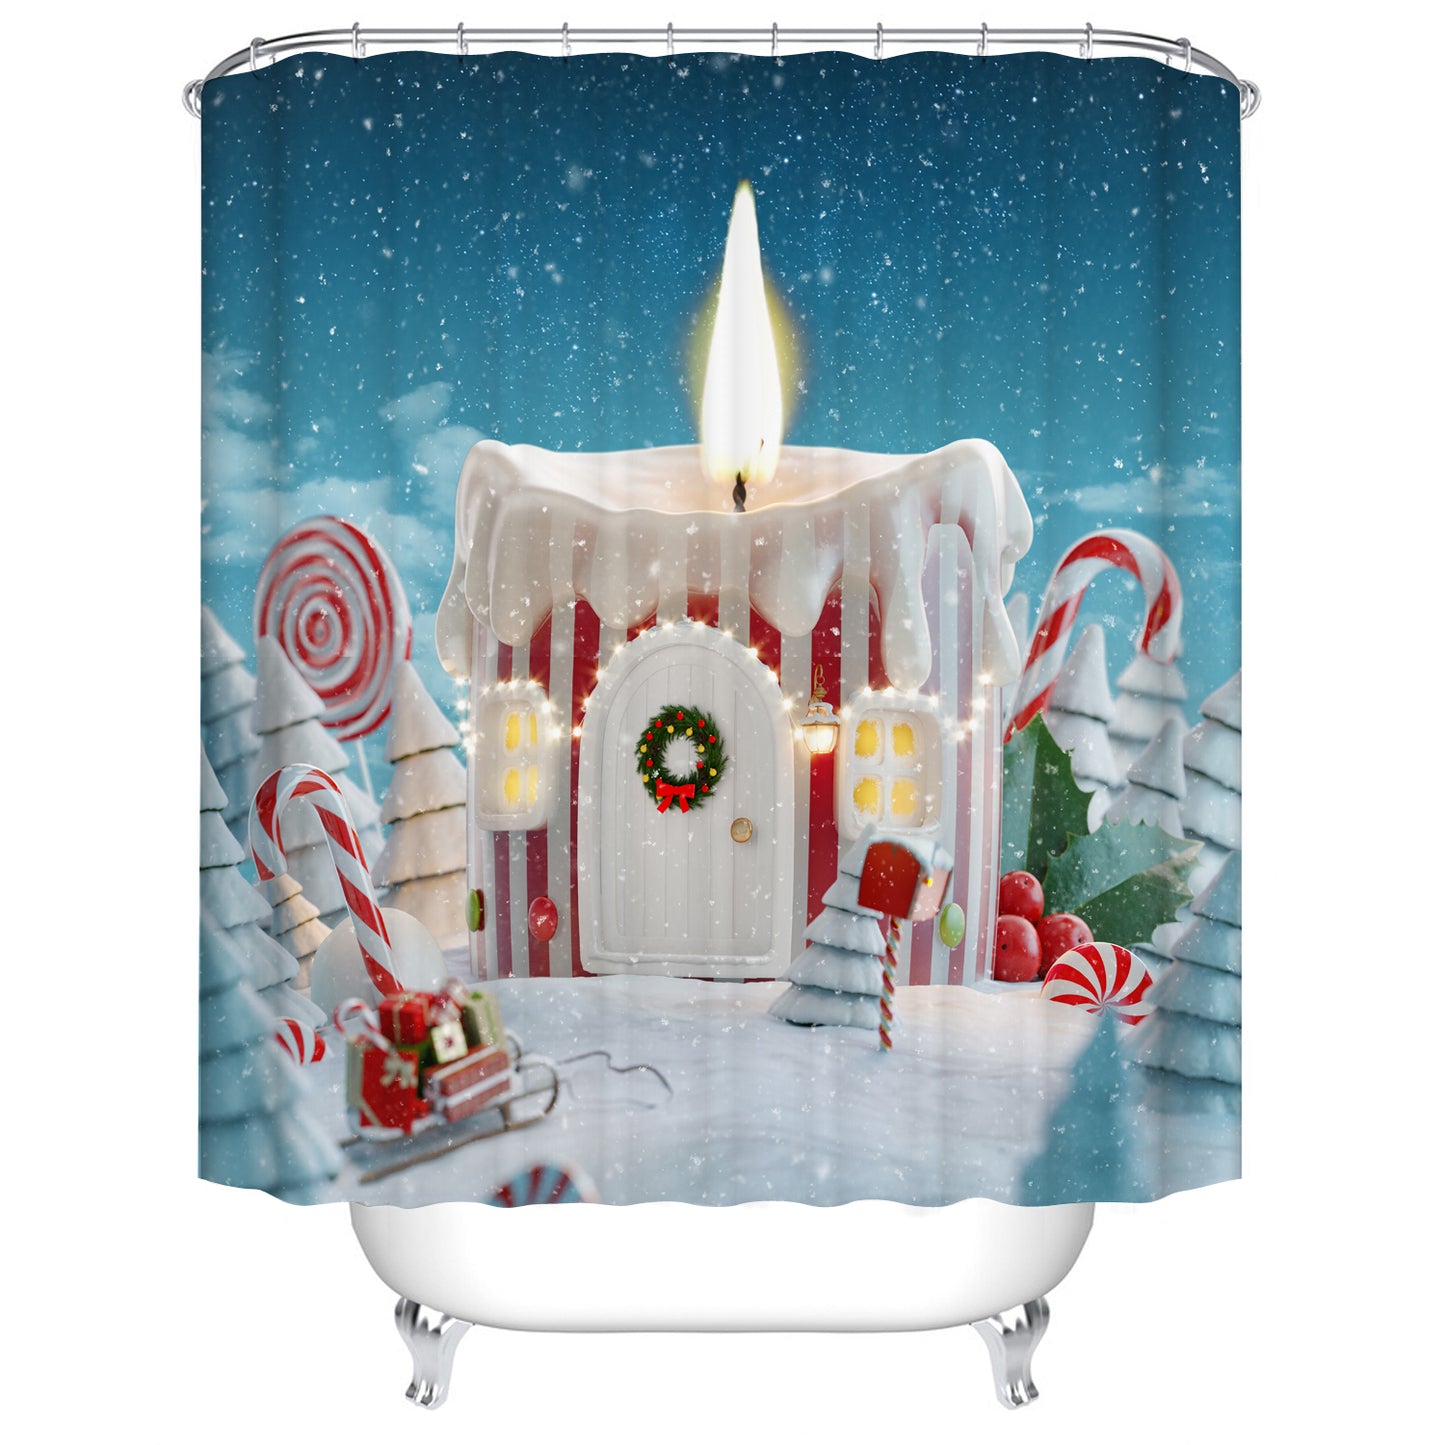 Candle Shaped House with Lights with Candy Canes Magical Christmas Candle Shower Curtain